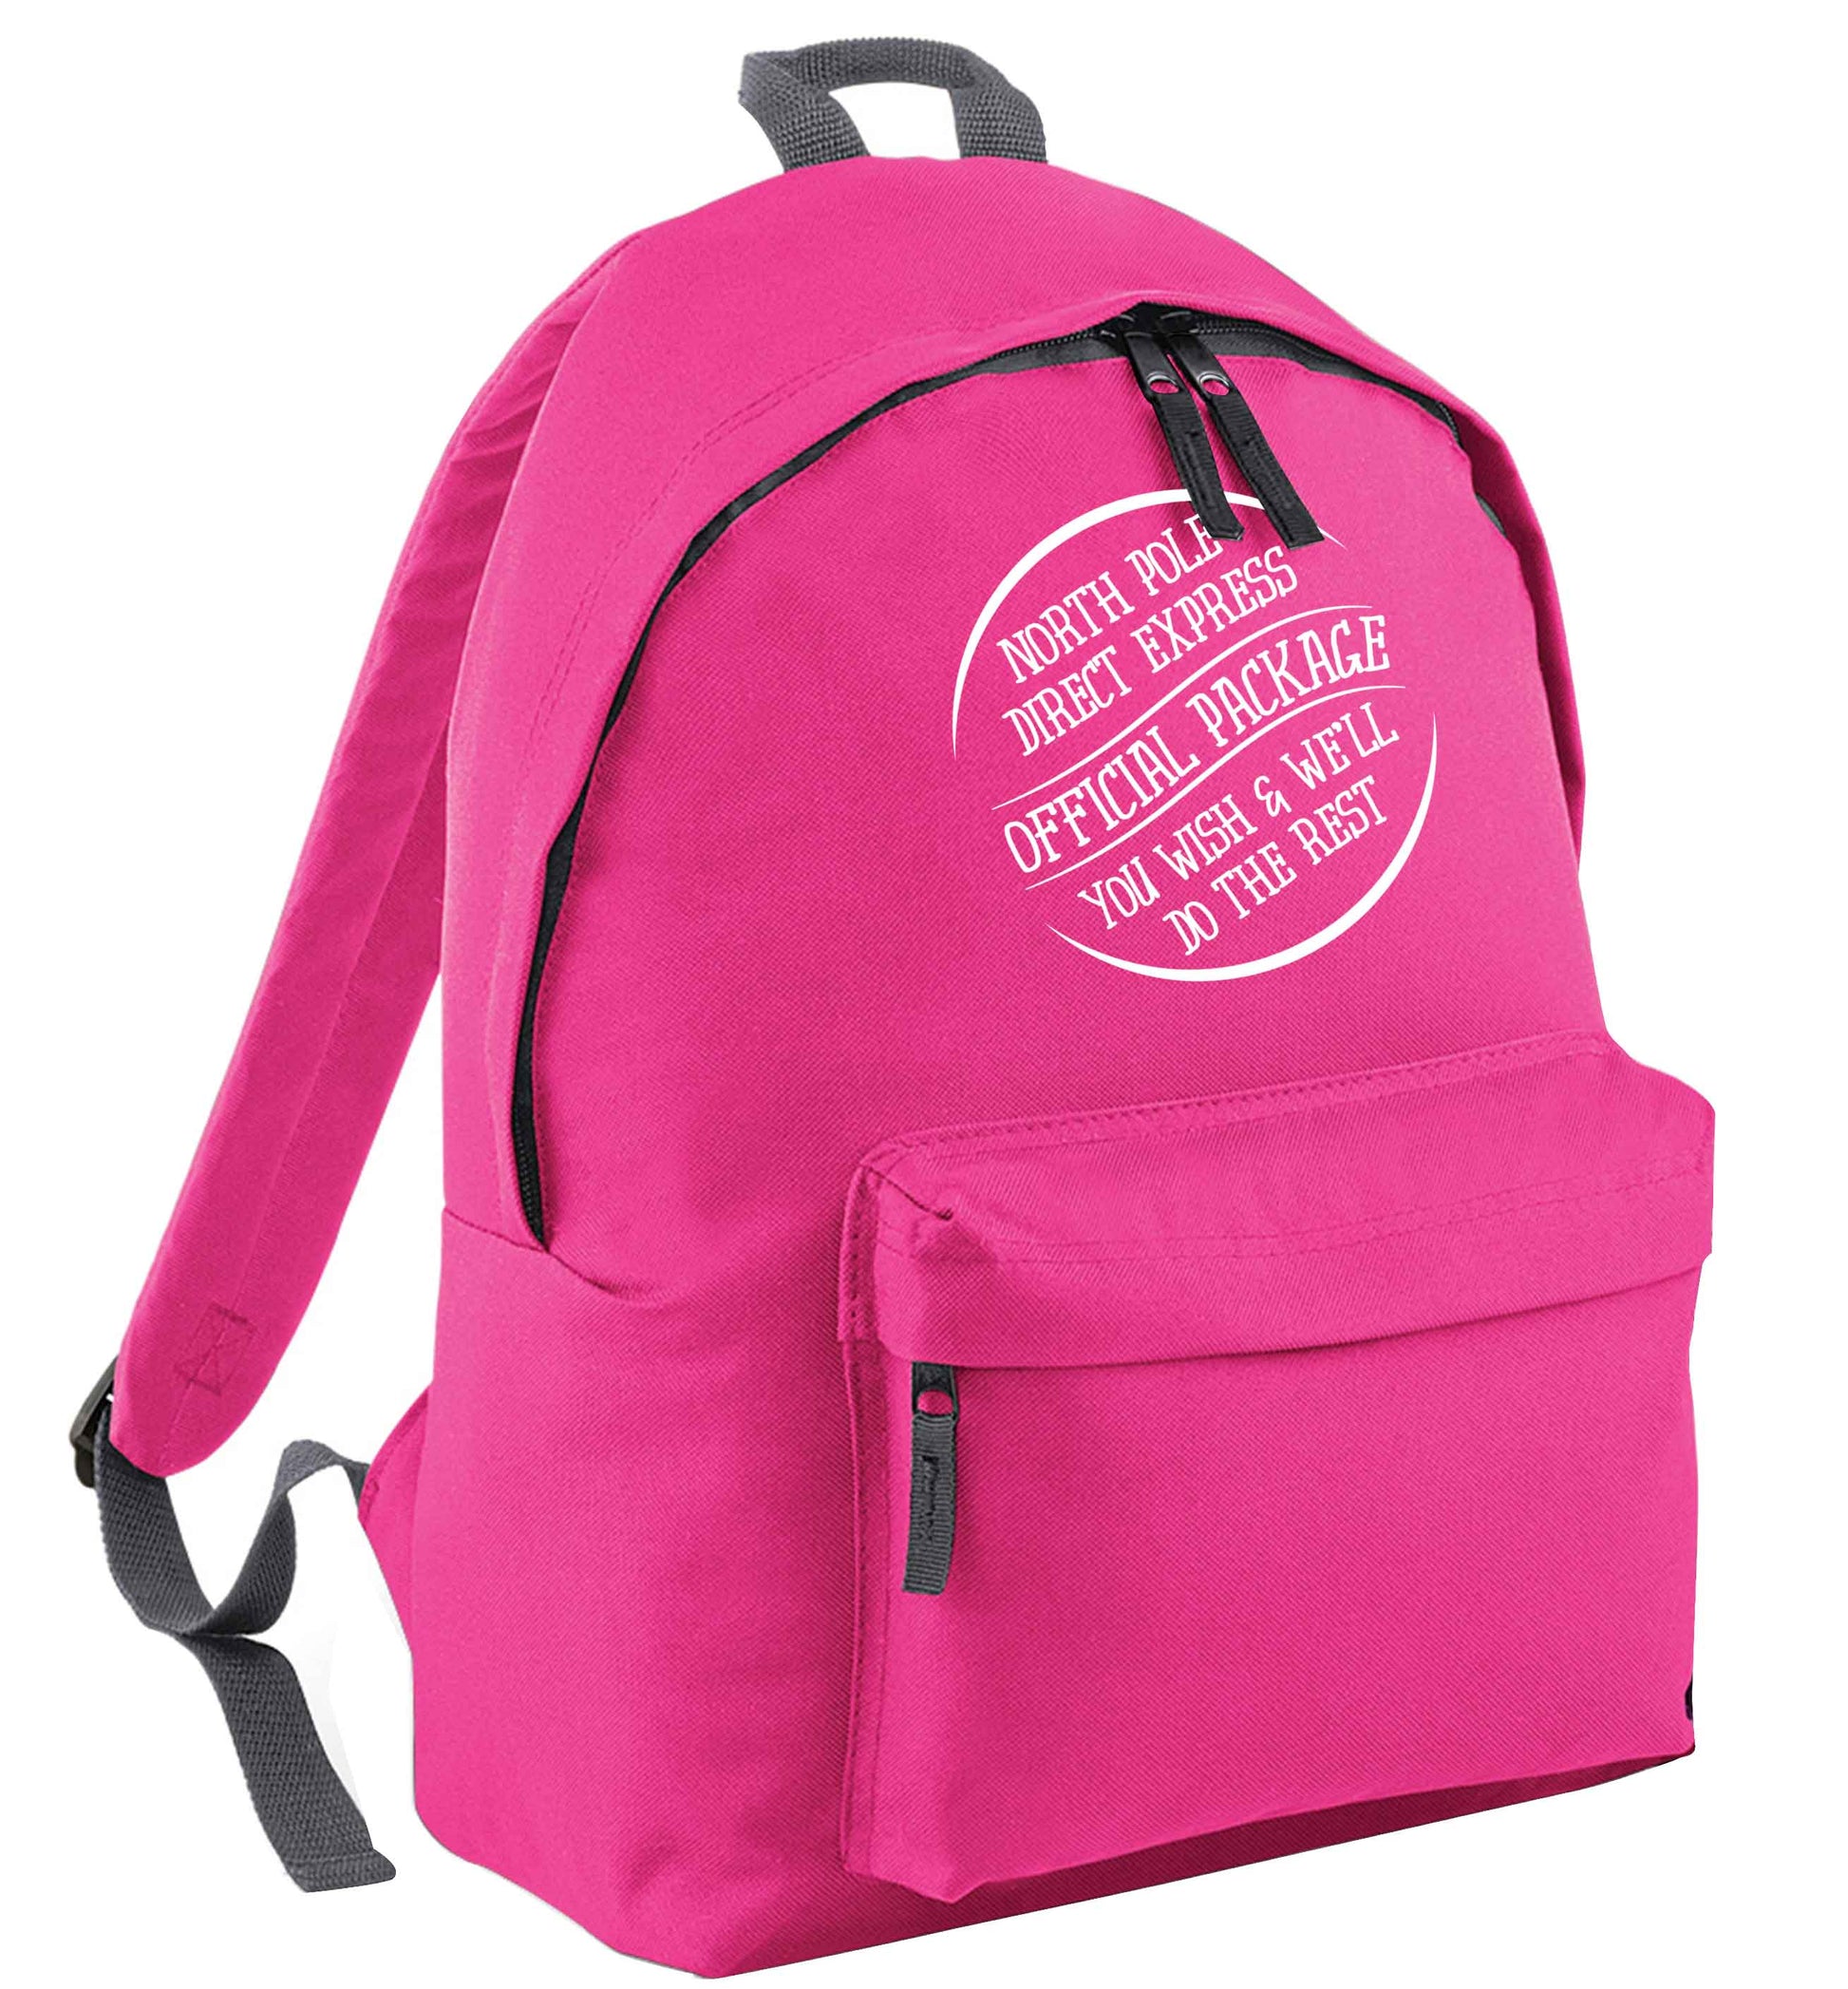 Merry Christmas pink adults backpack